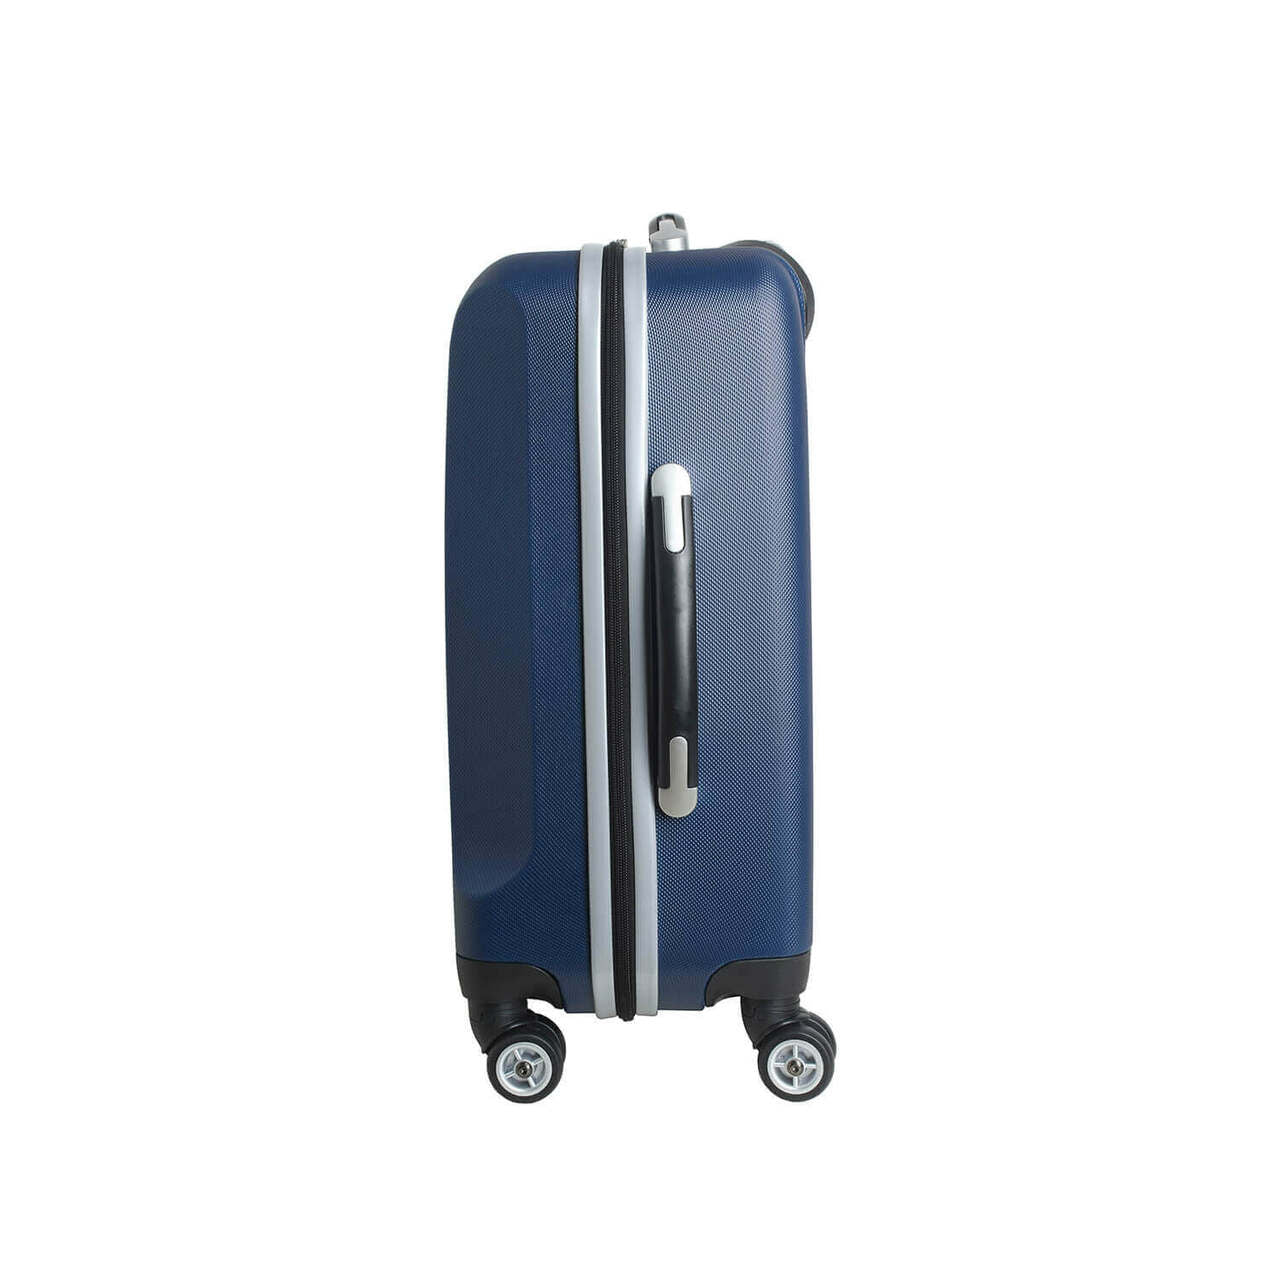 Personalized Initial Name letter "N" 20 inches Carry on Hardcase Spinner Luggage by Mojo in NAVY